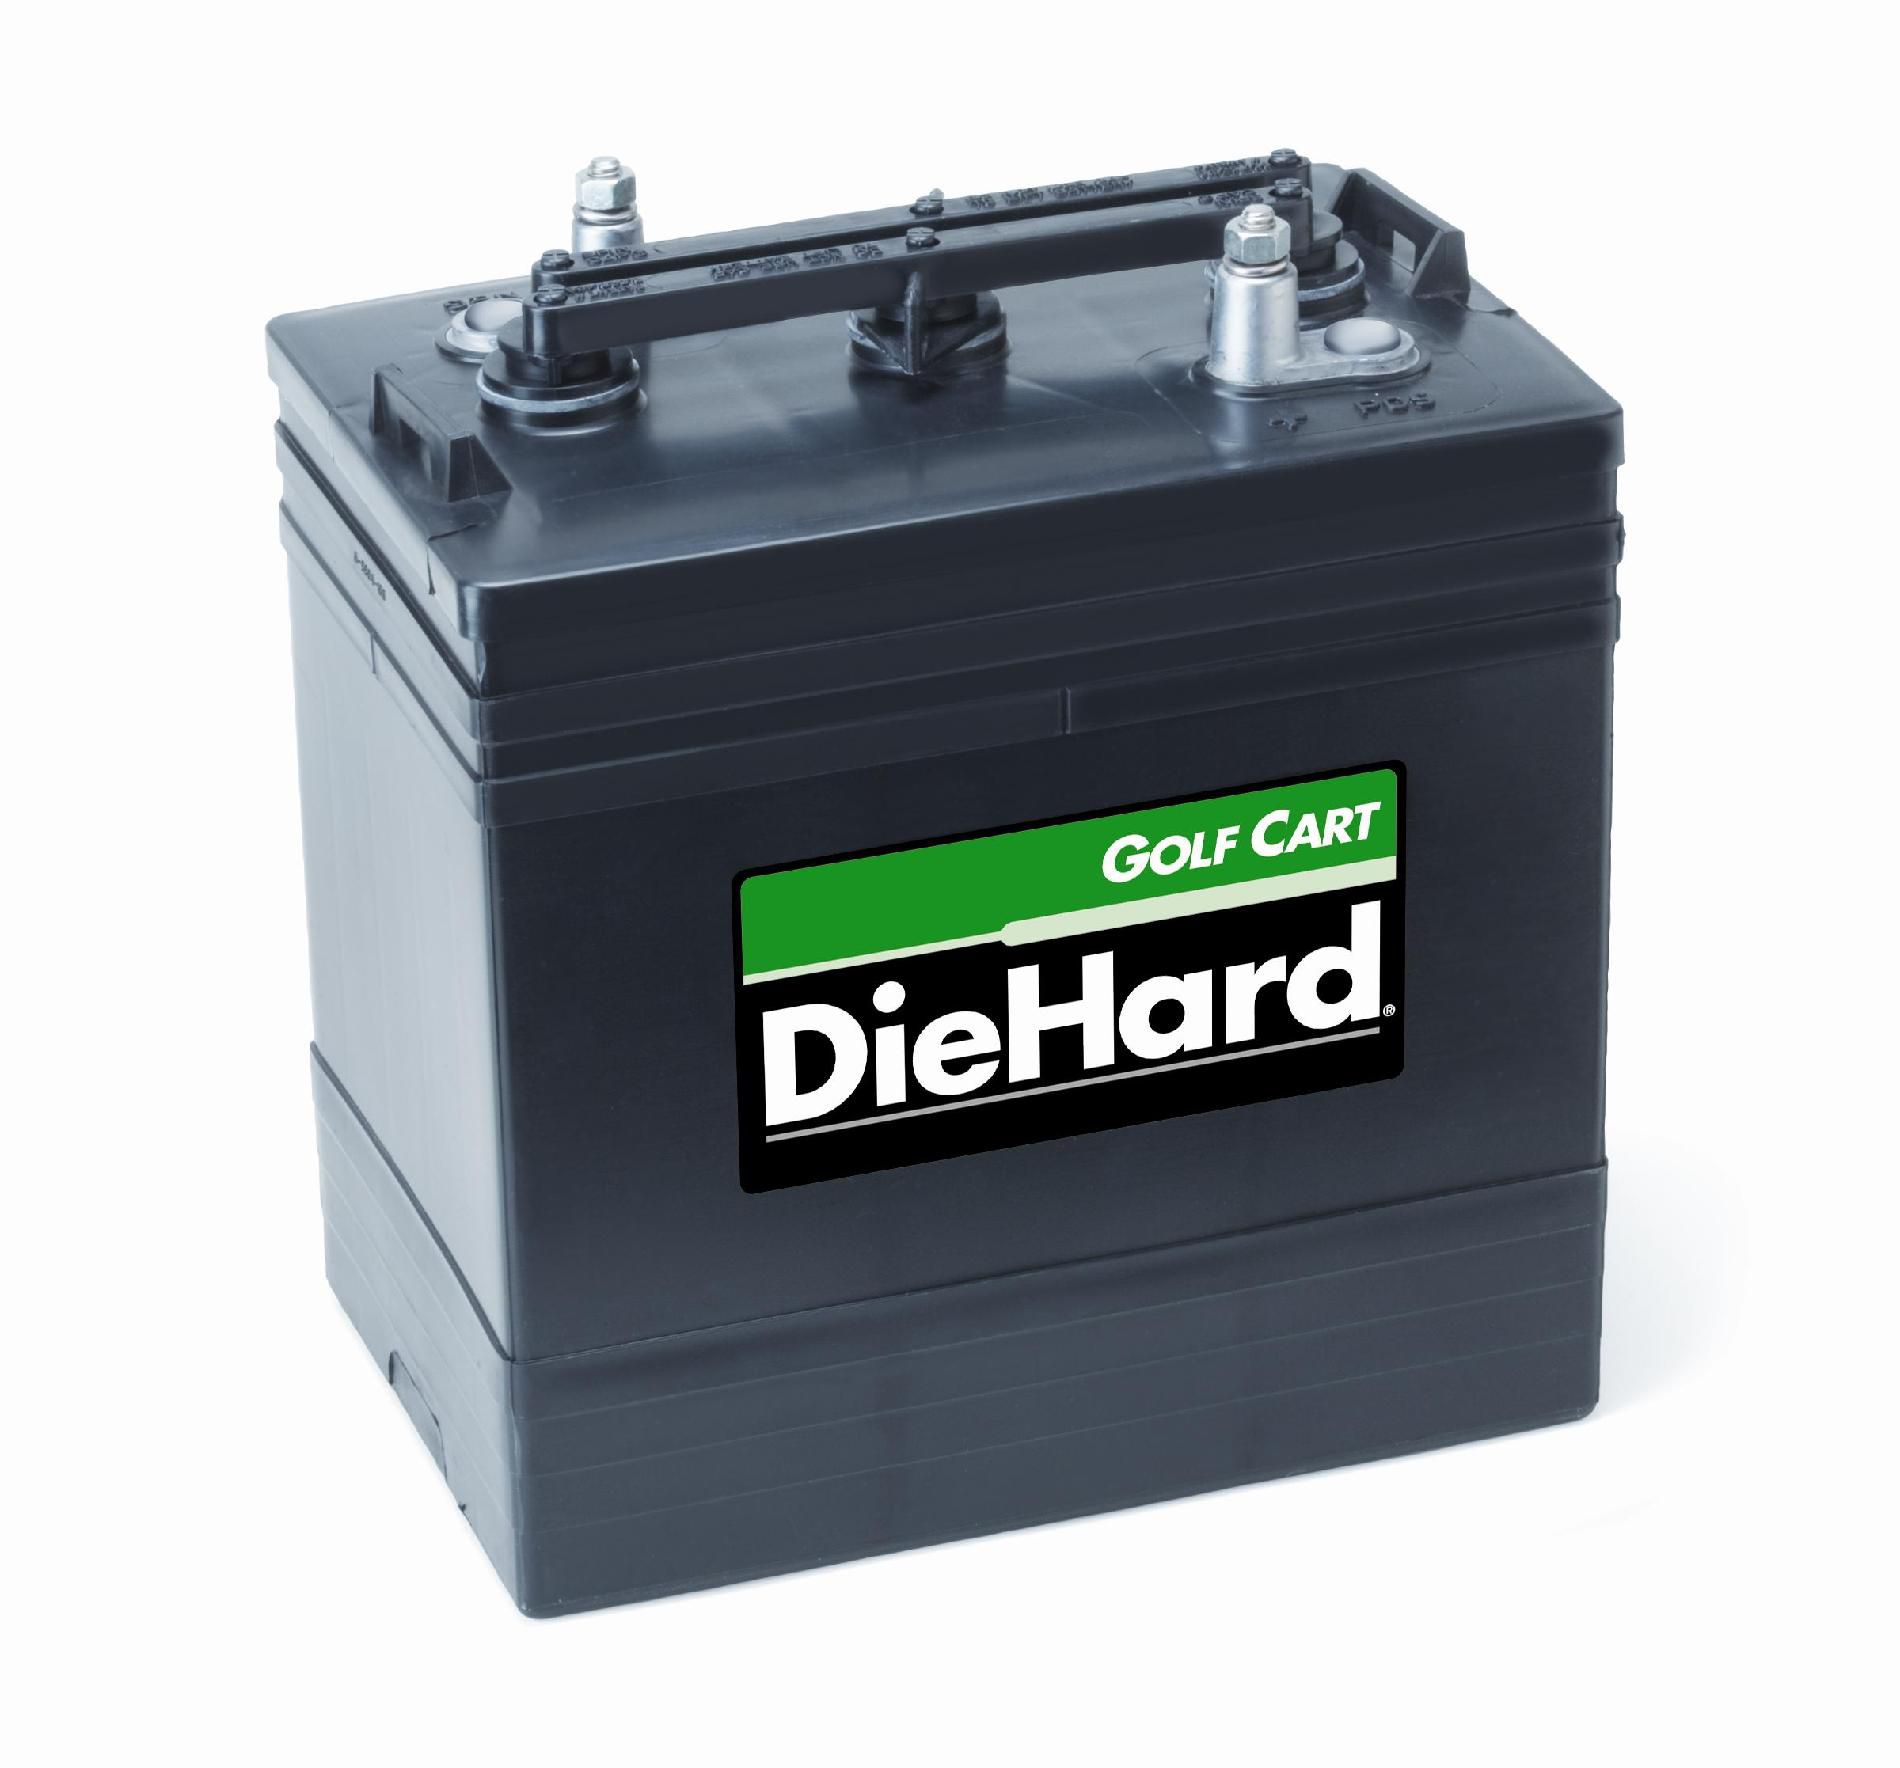 DieHard Golf Cart Battery - Group Size JC-GC2 (Price with Exchange Duracell Golf Car Battery Group Size Egc2